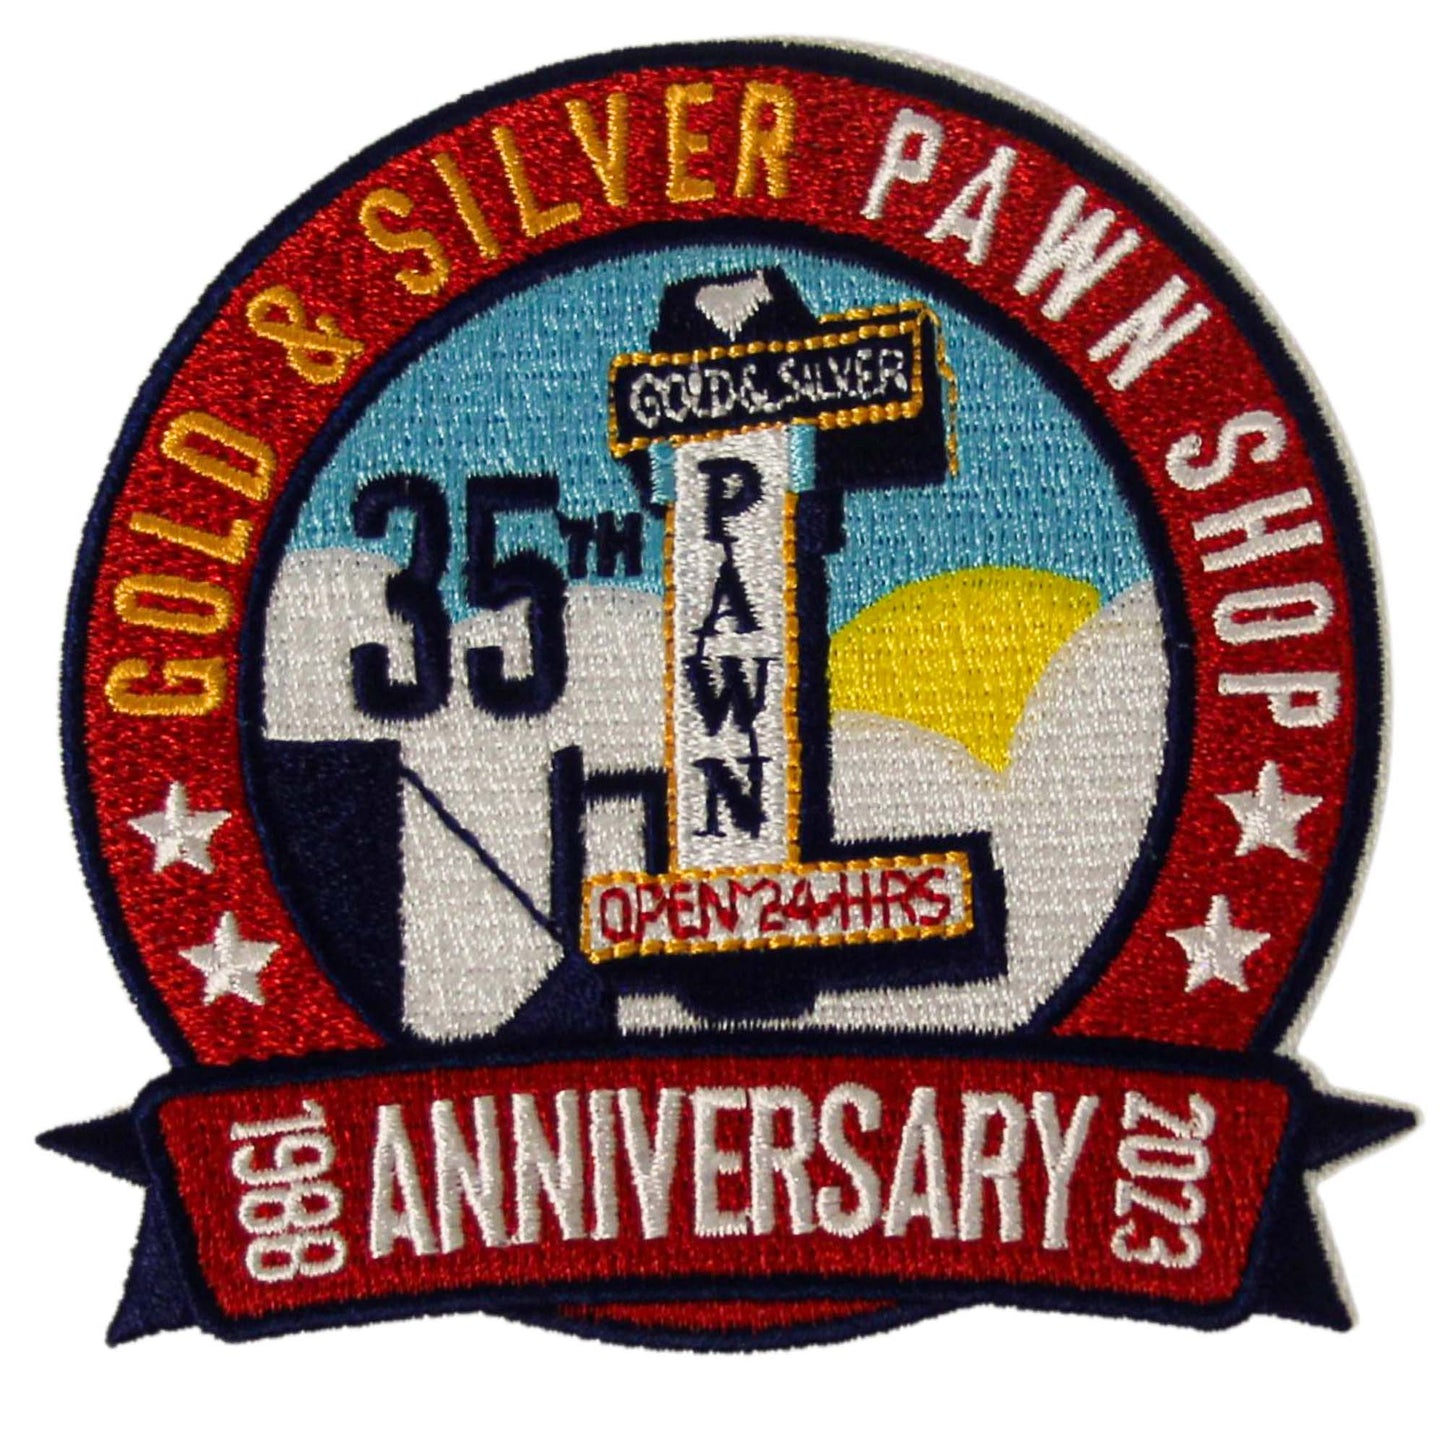 The World Famous Gold & Silver Pawn Shop Patches Red Outline